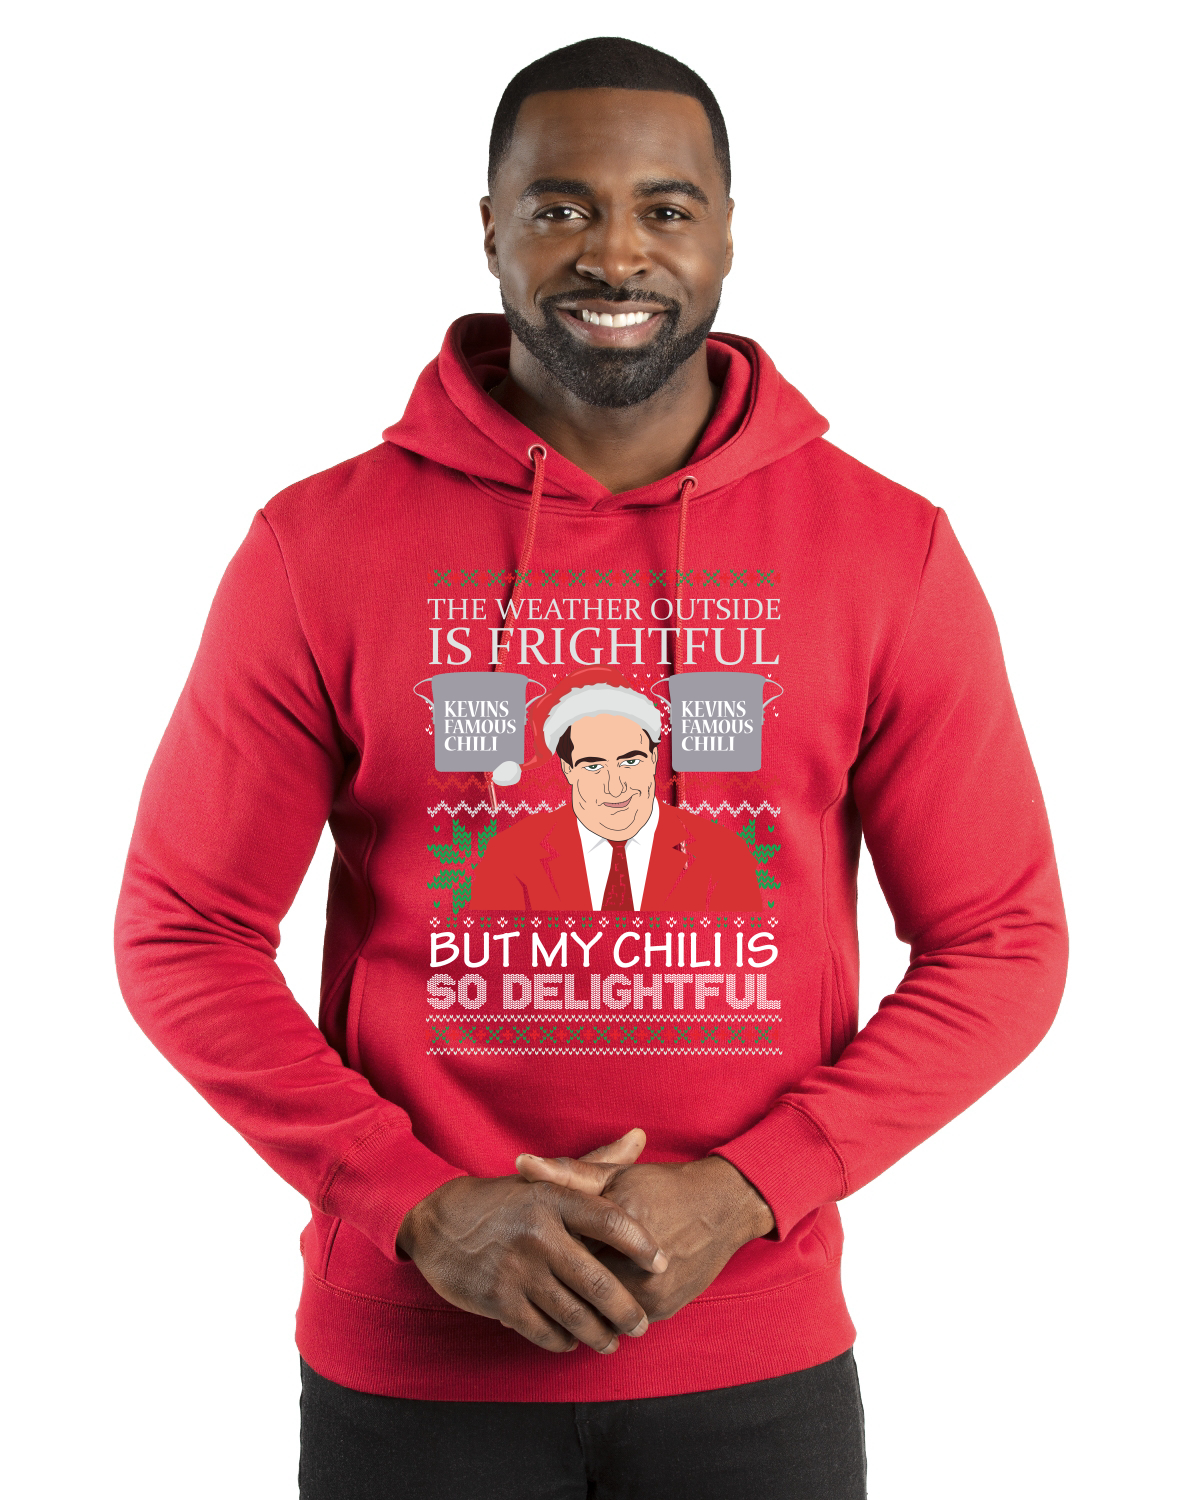 Kevin's Famous Chili is So Delightful Xmas Ugly Christmas Sweater Premium Graphic Hoodie Sweatshirt, Red, Large - image 1 of 3